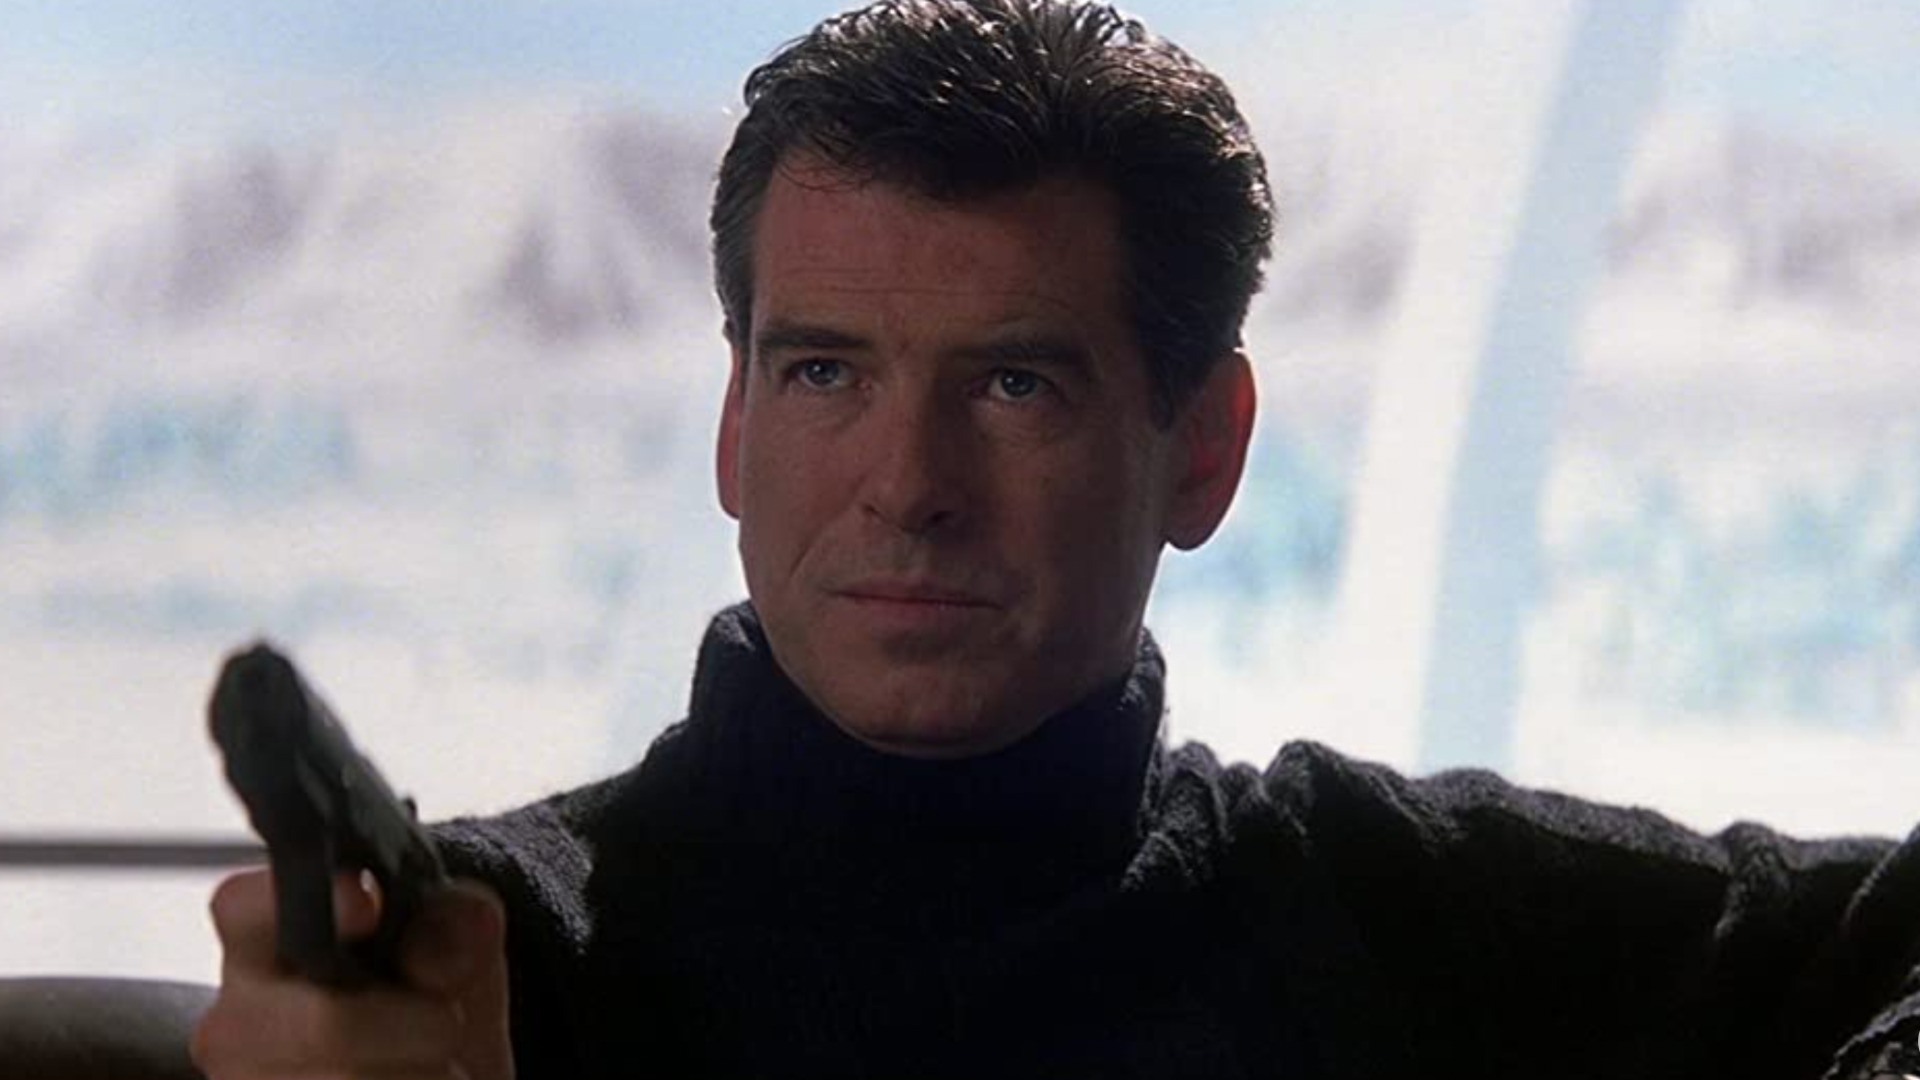 Pierce Brosnan’s Die Another Day almost featured a key No Time to Die scene